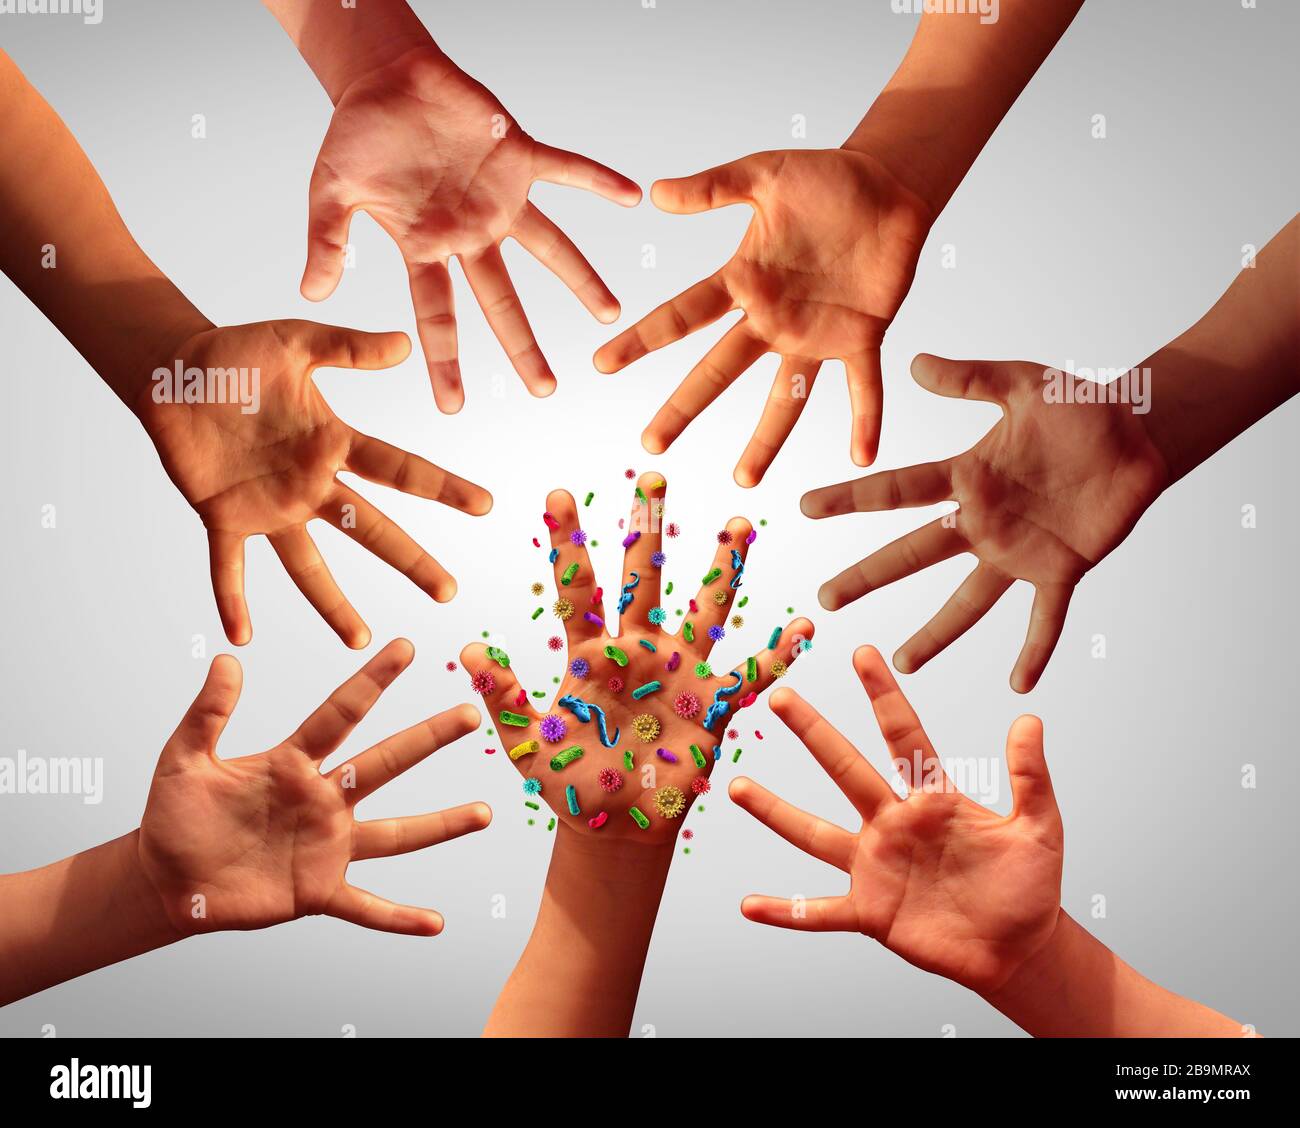 Community disease spread and Infectious diseases spreading in society as a hygiene health concept as hands with contagious germ virus and bacteria. Stock Photo